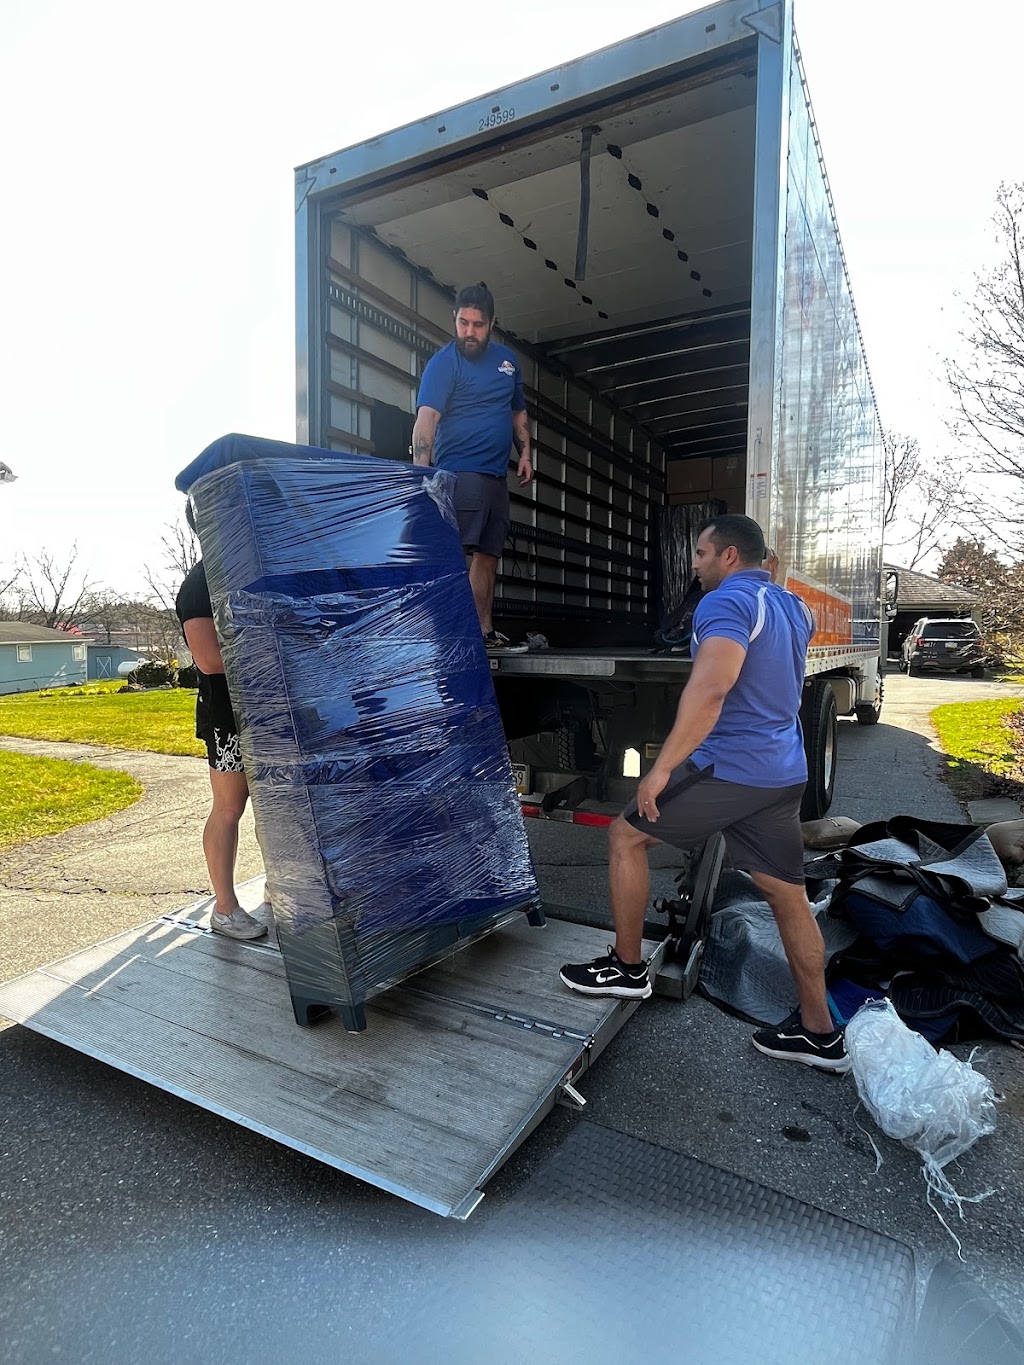 Reliable Movers LLC Allentown, Pa | 6091 Palomino Dr, Allentown, PA 18106 | Phone: (610) 597-7767